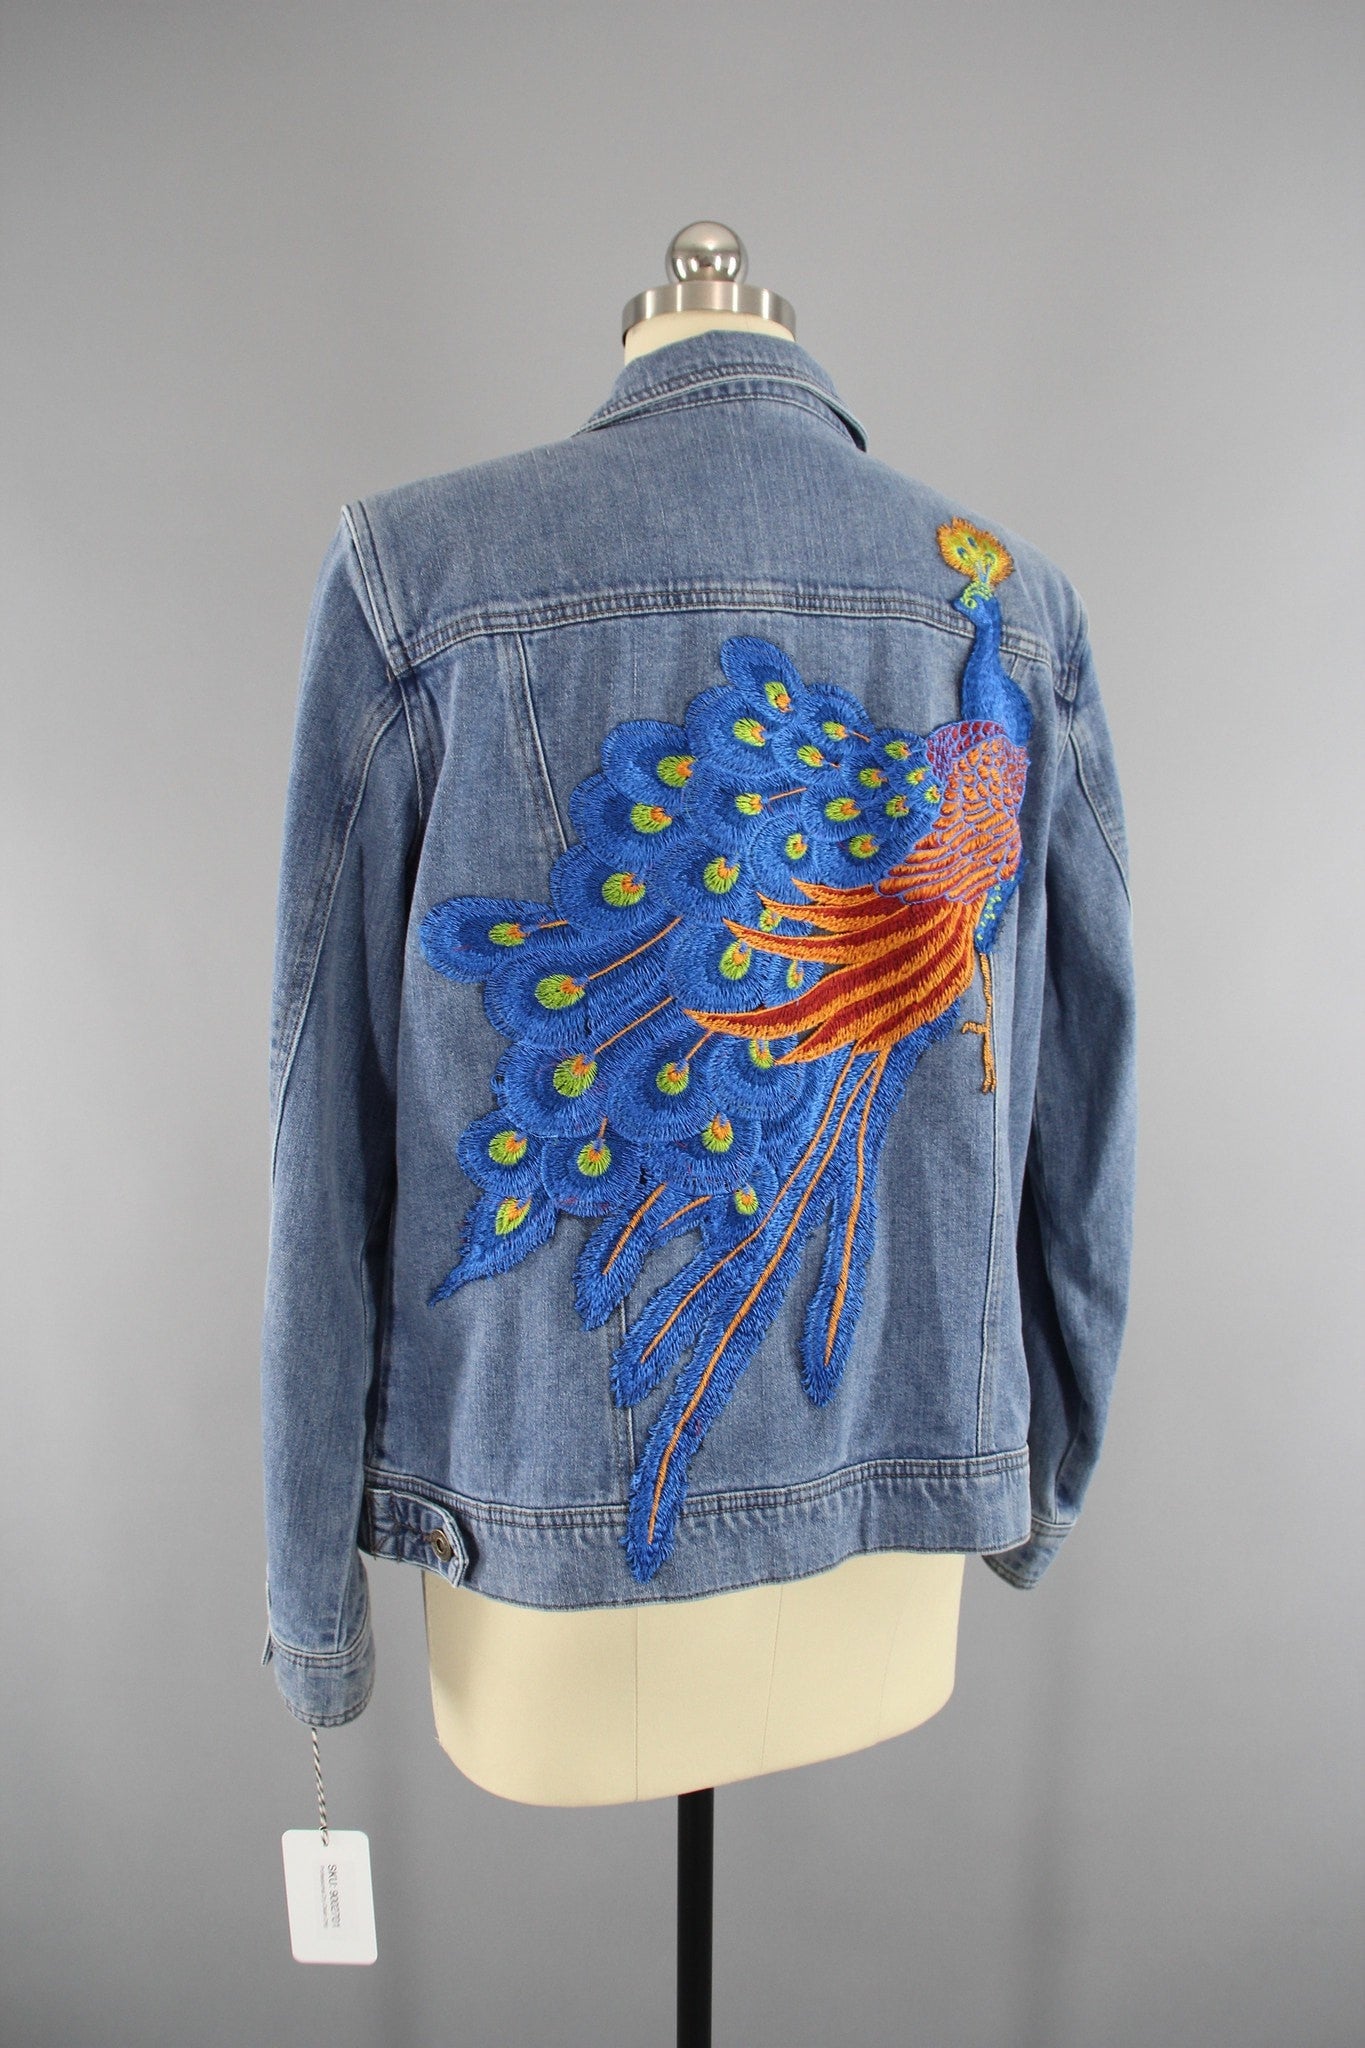 Vintage Style Denim Jacket with Royal Blue Peacock Embroidery